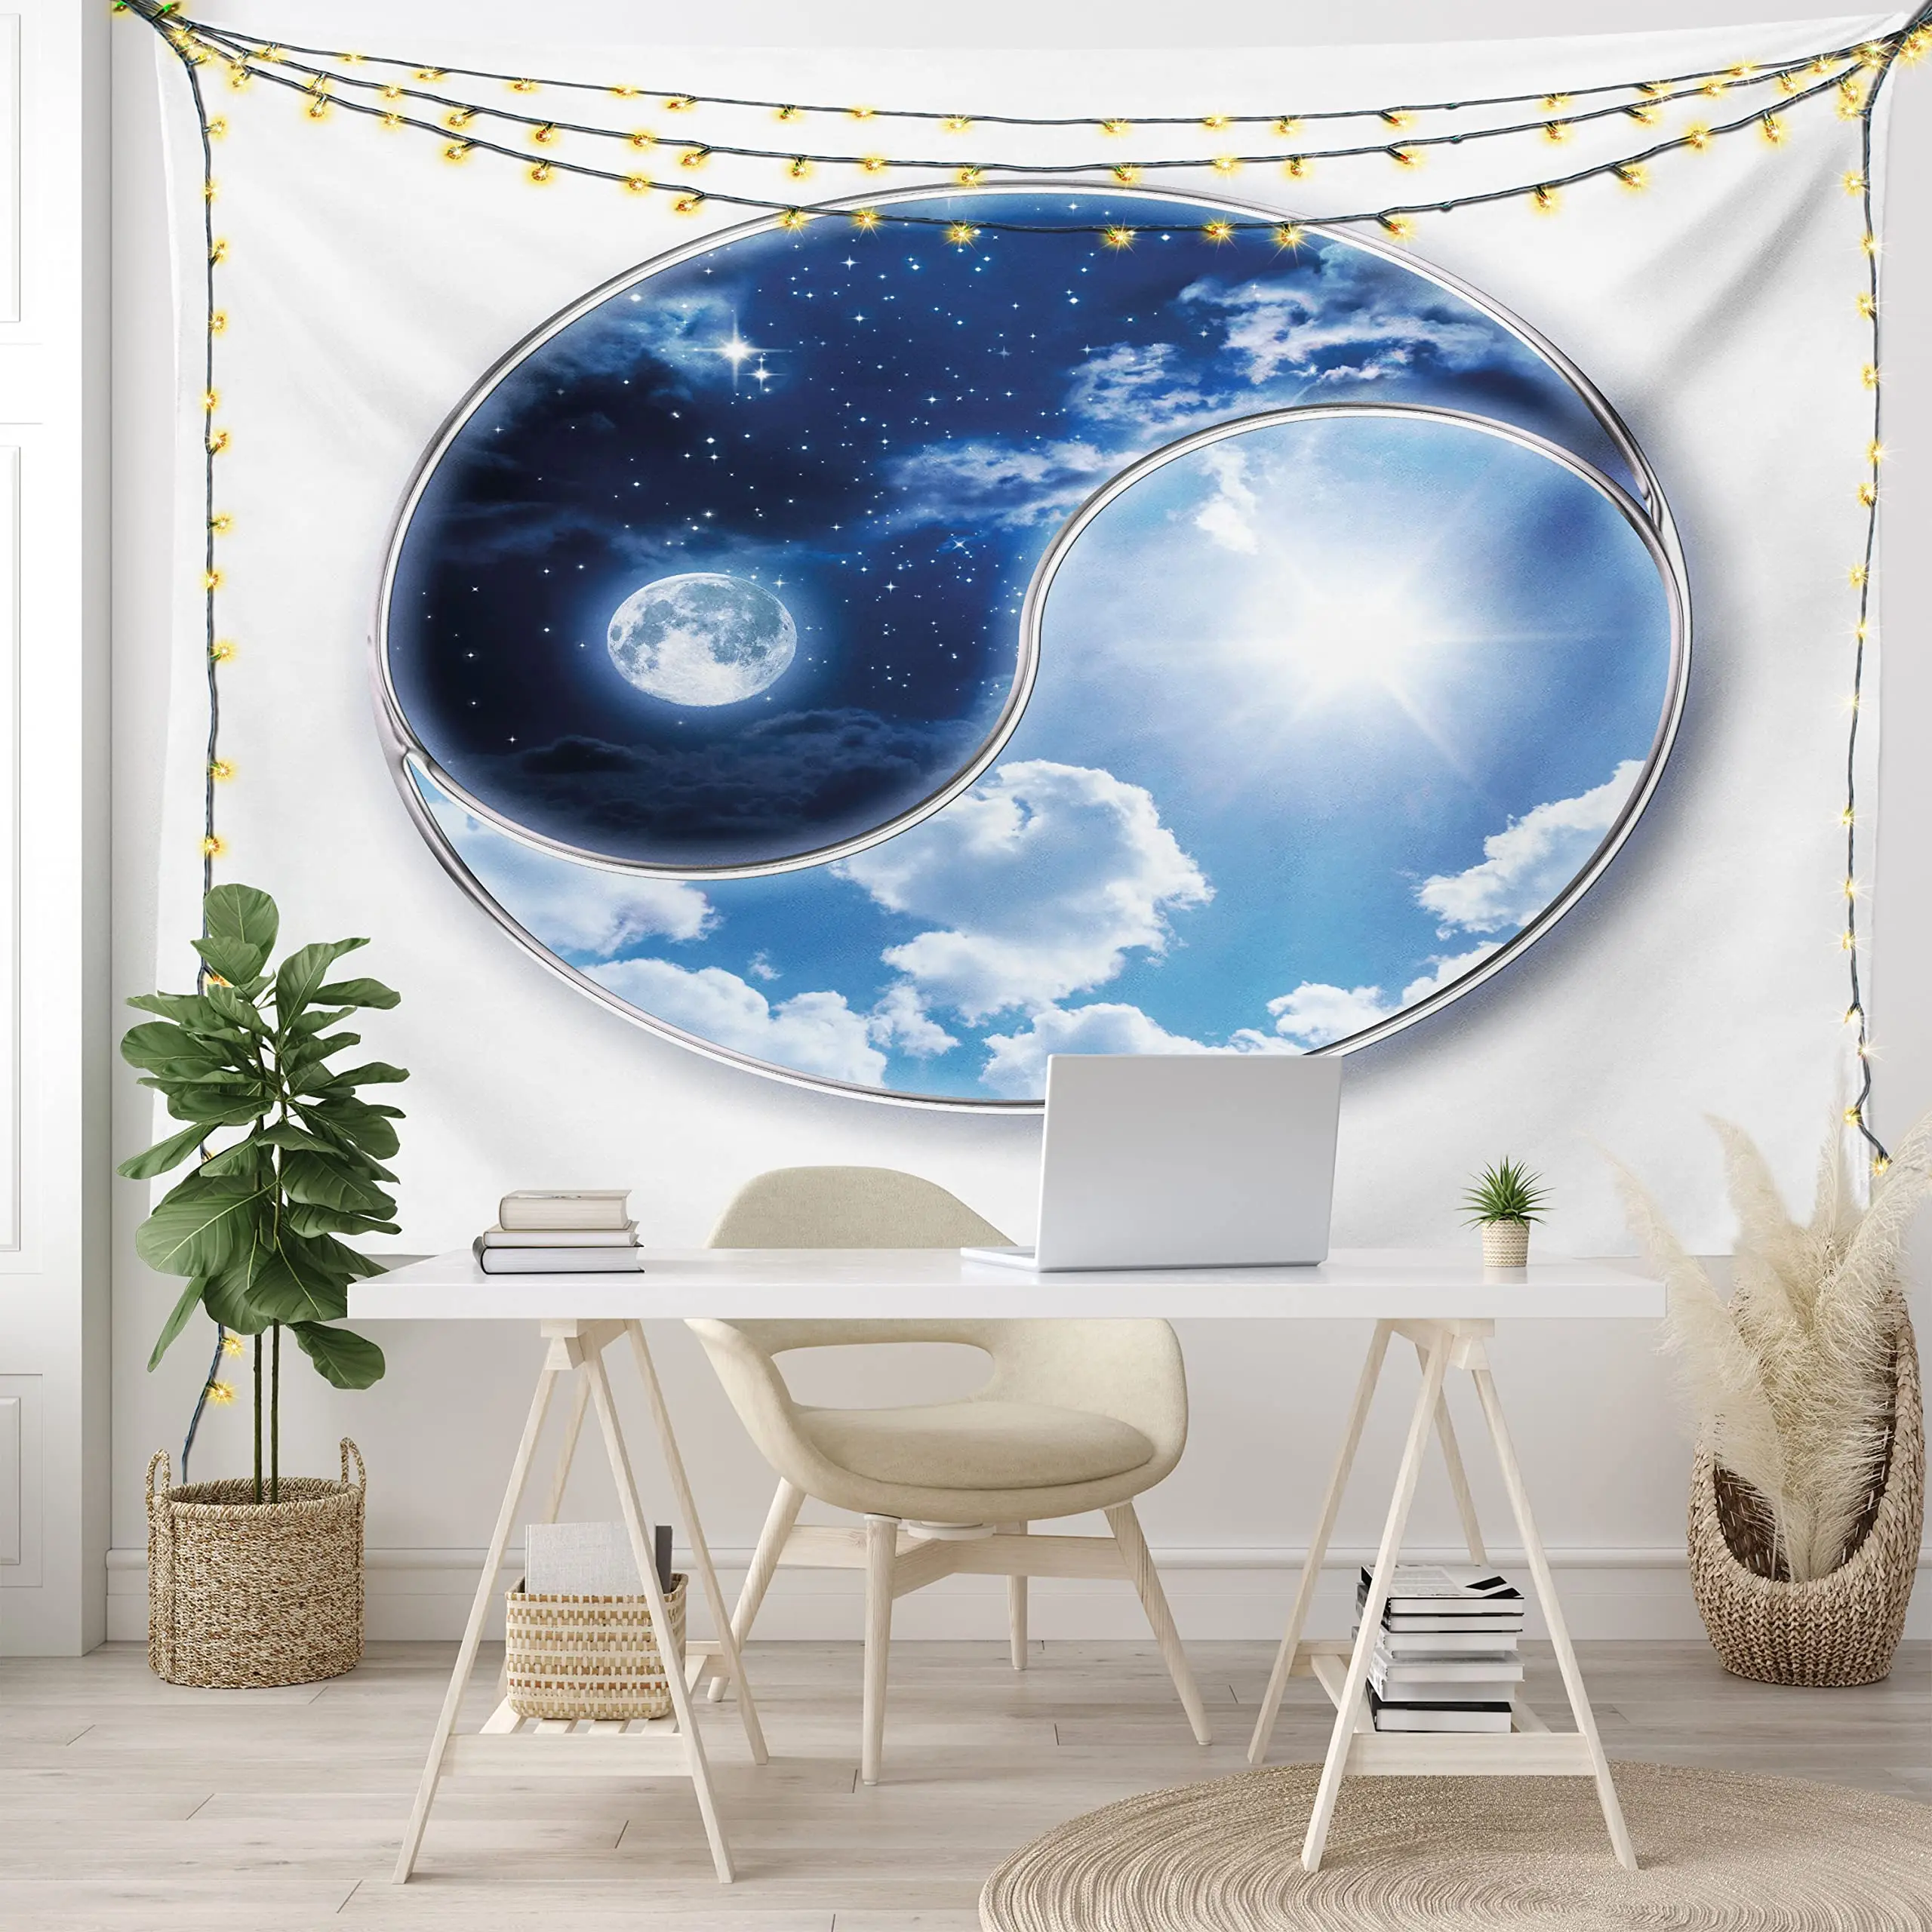 

Tai Chi Yin Yang Moon and Sun Tapestry Chinese Style Art Printing Tapestries Wall Hanging Decor for Bedroom Living Room Dorm